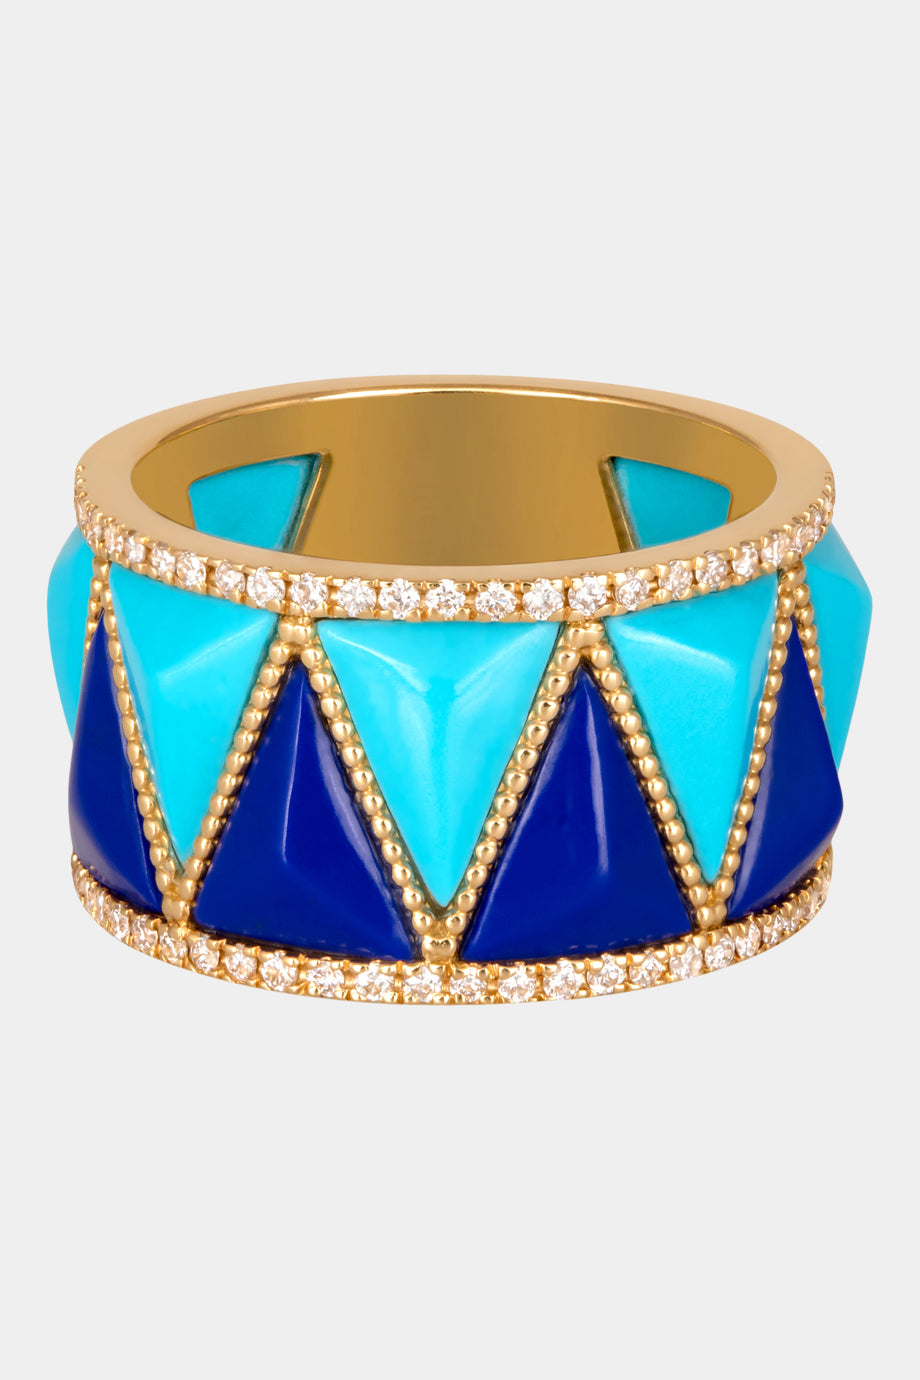 Soho Gold Encrusted With Turquoise And Lapis Pulse Ring